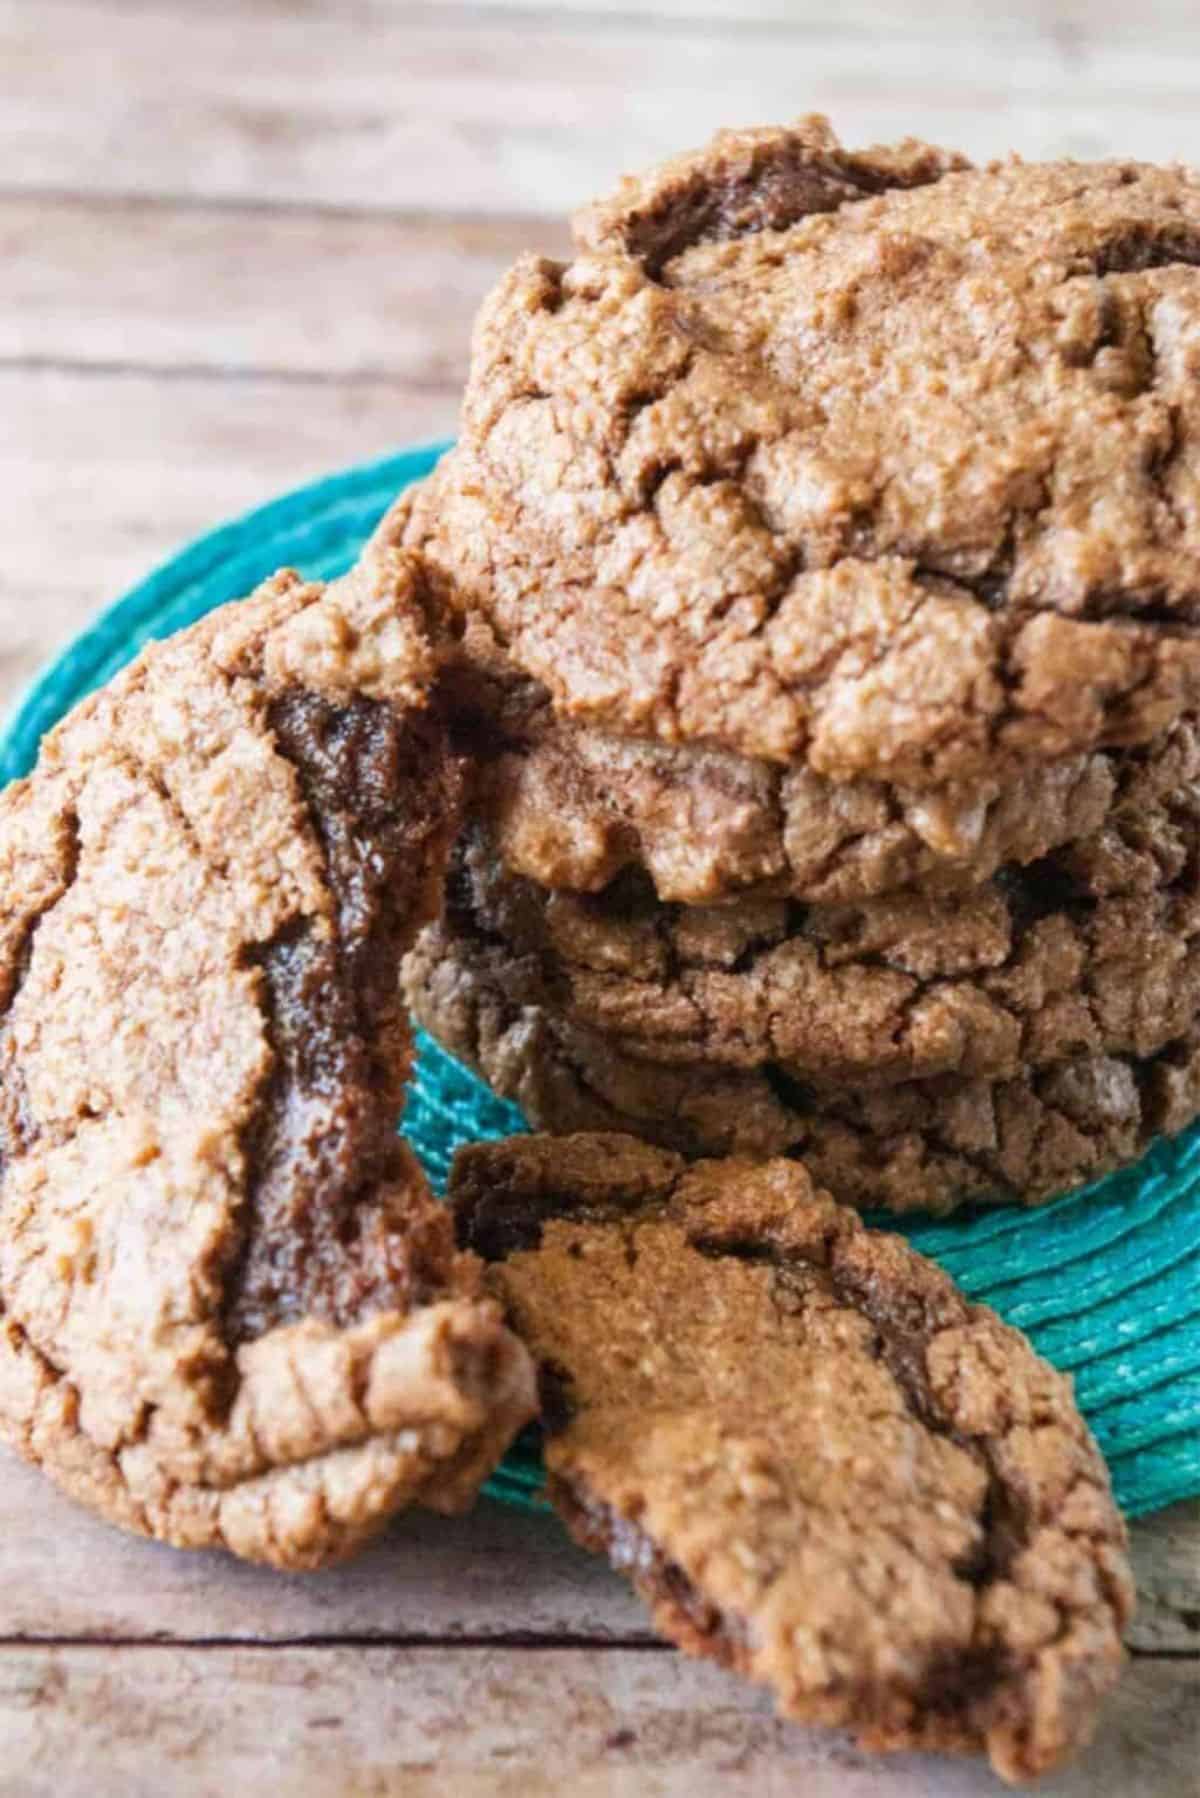 A pile of Chewy Chocolate Brownie Cookies on a wooden table.